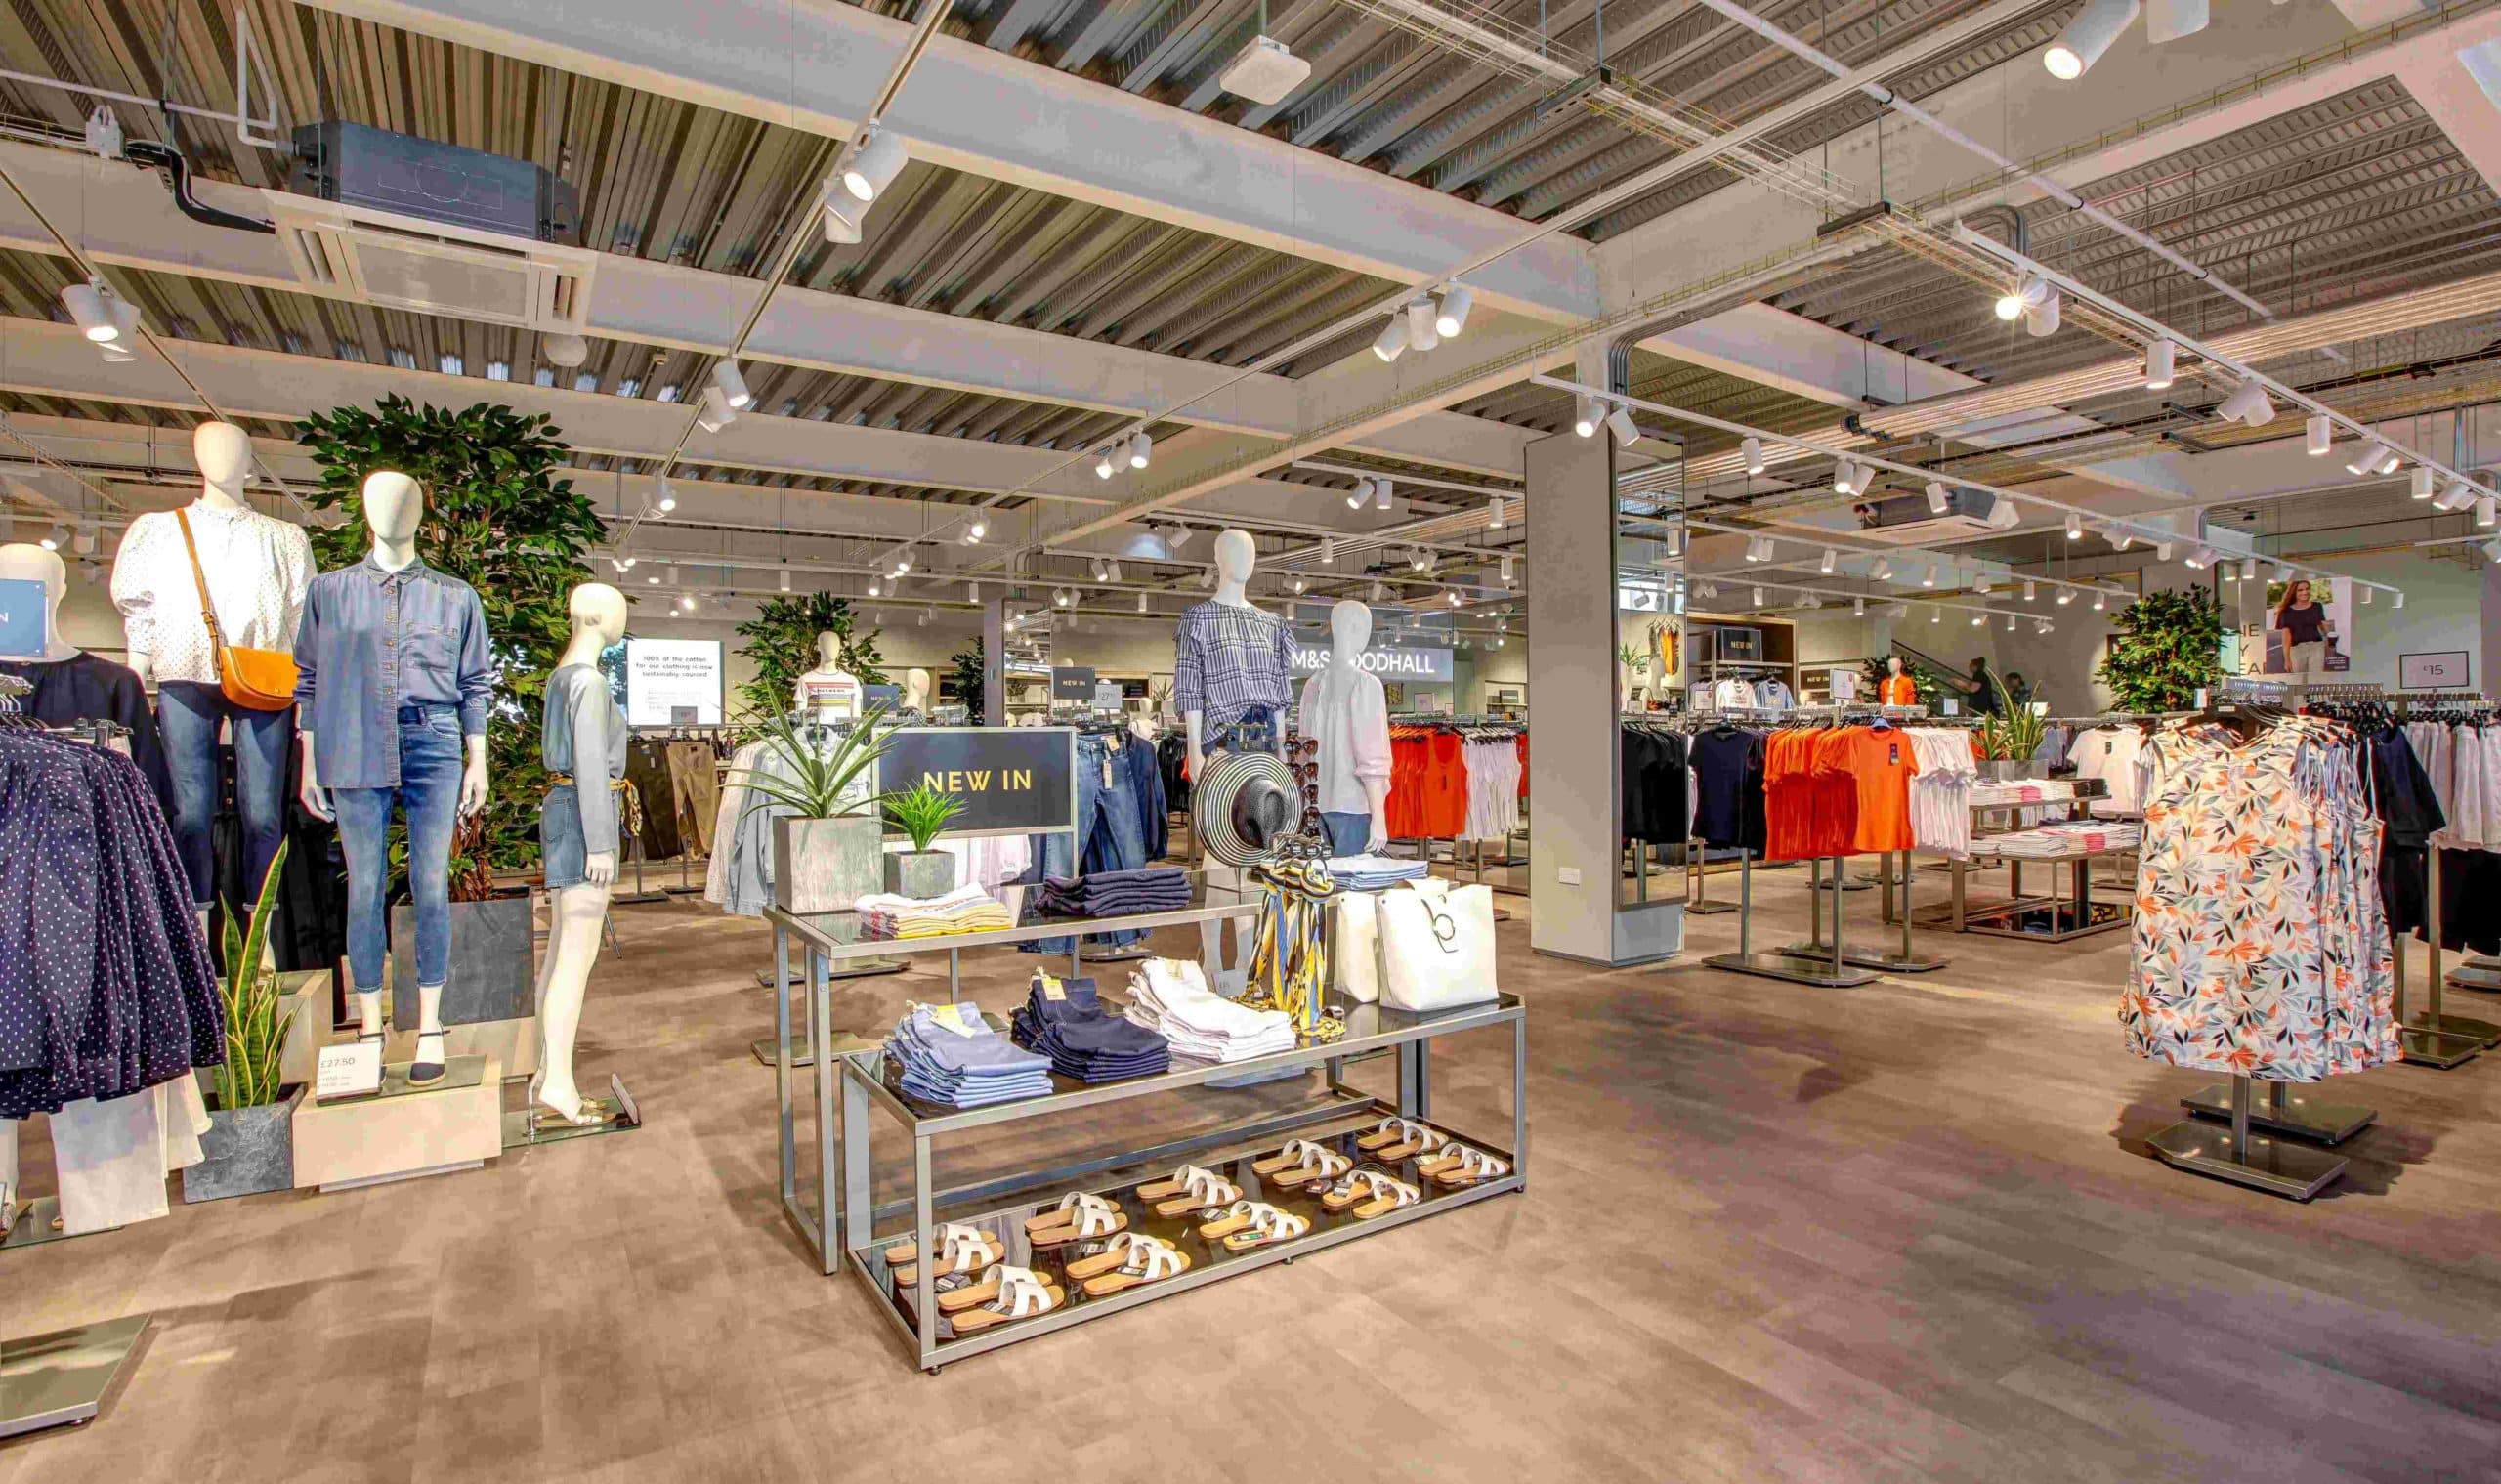 New M&S Liverpool store to open mid-2023 - Liverpool Business News